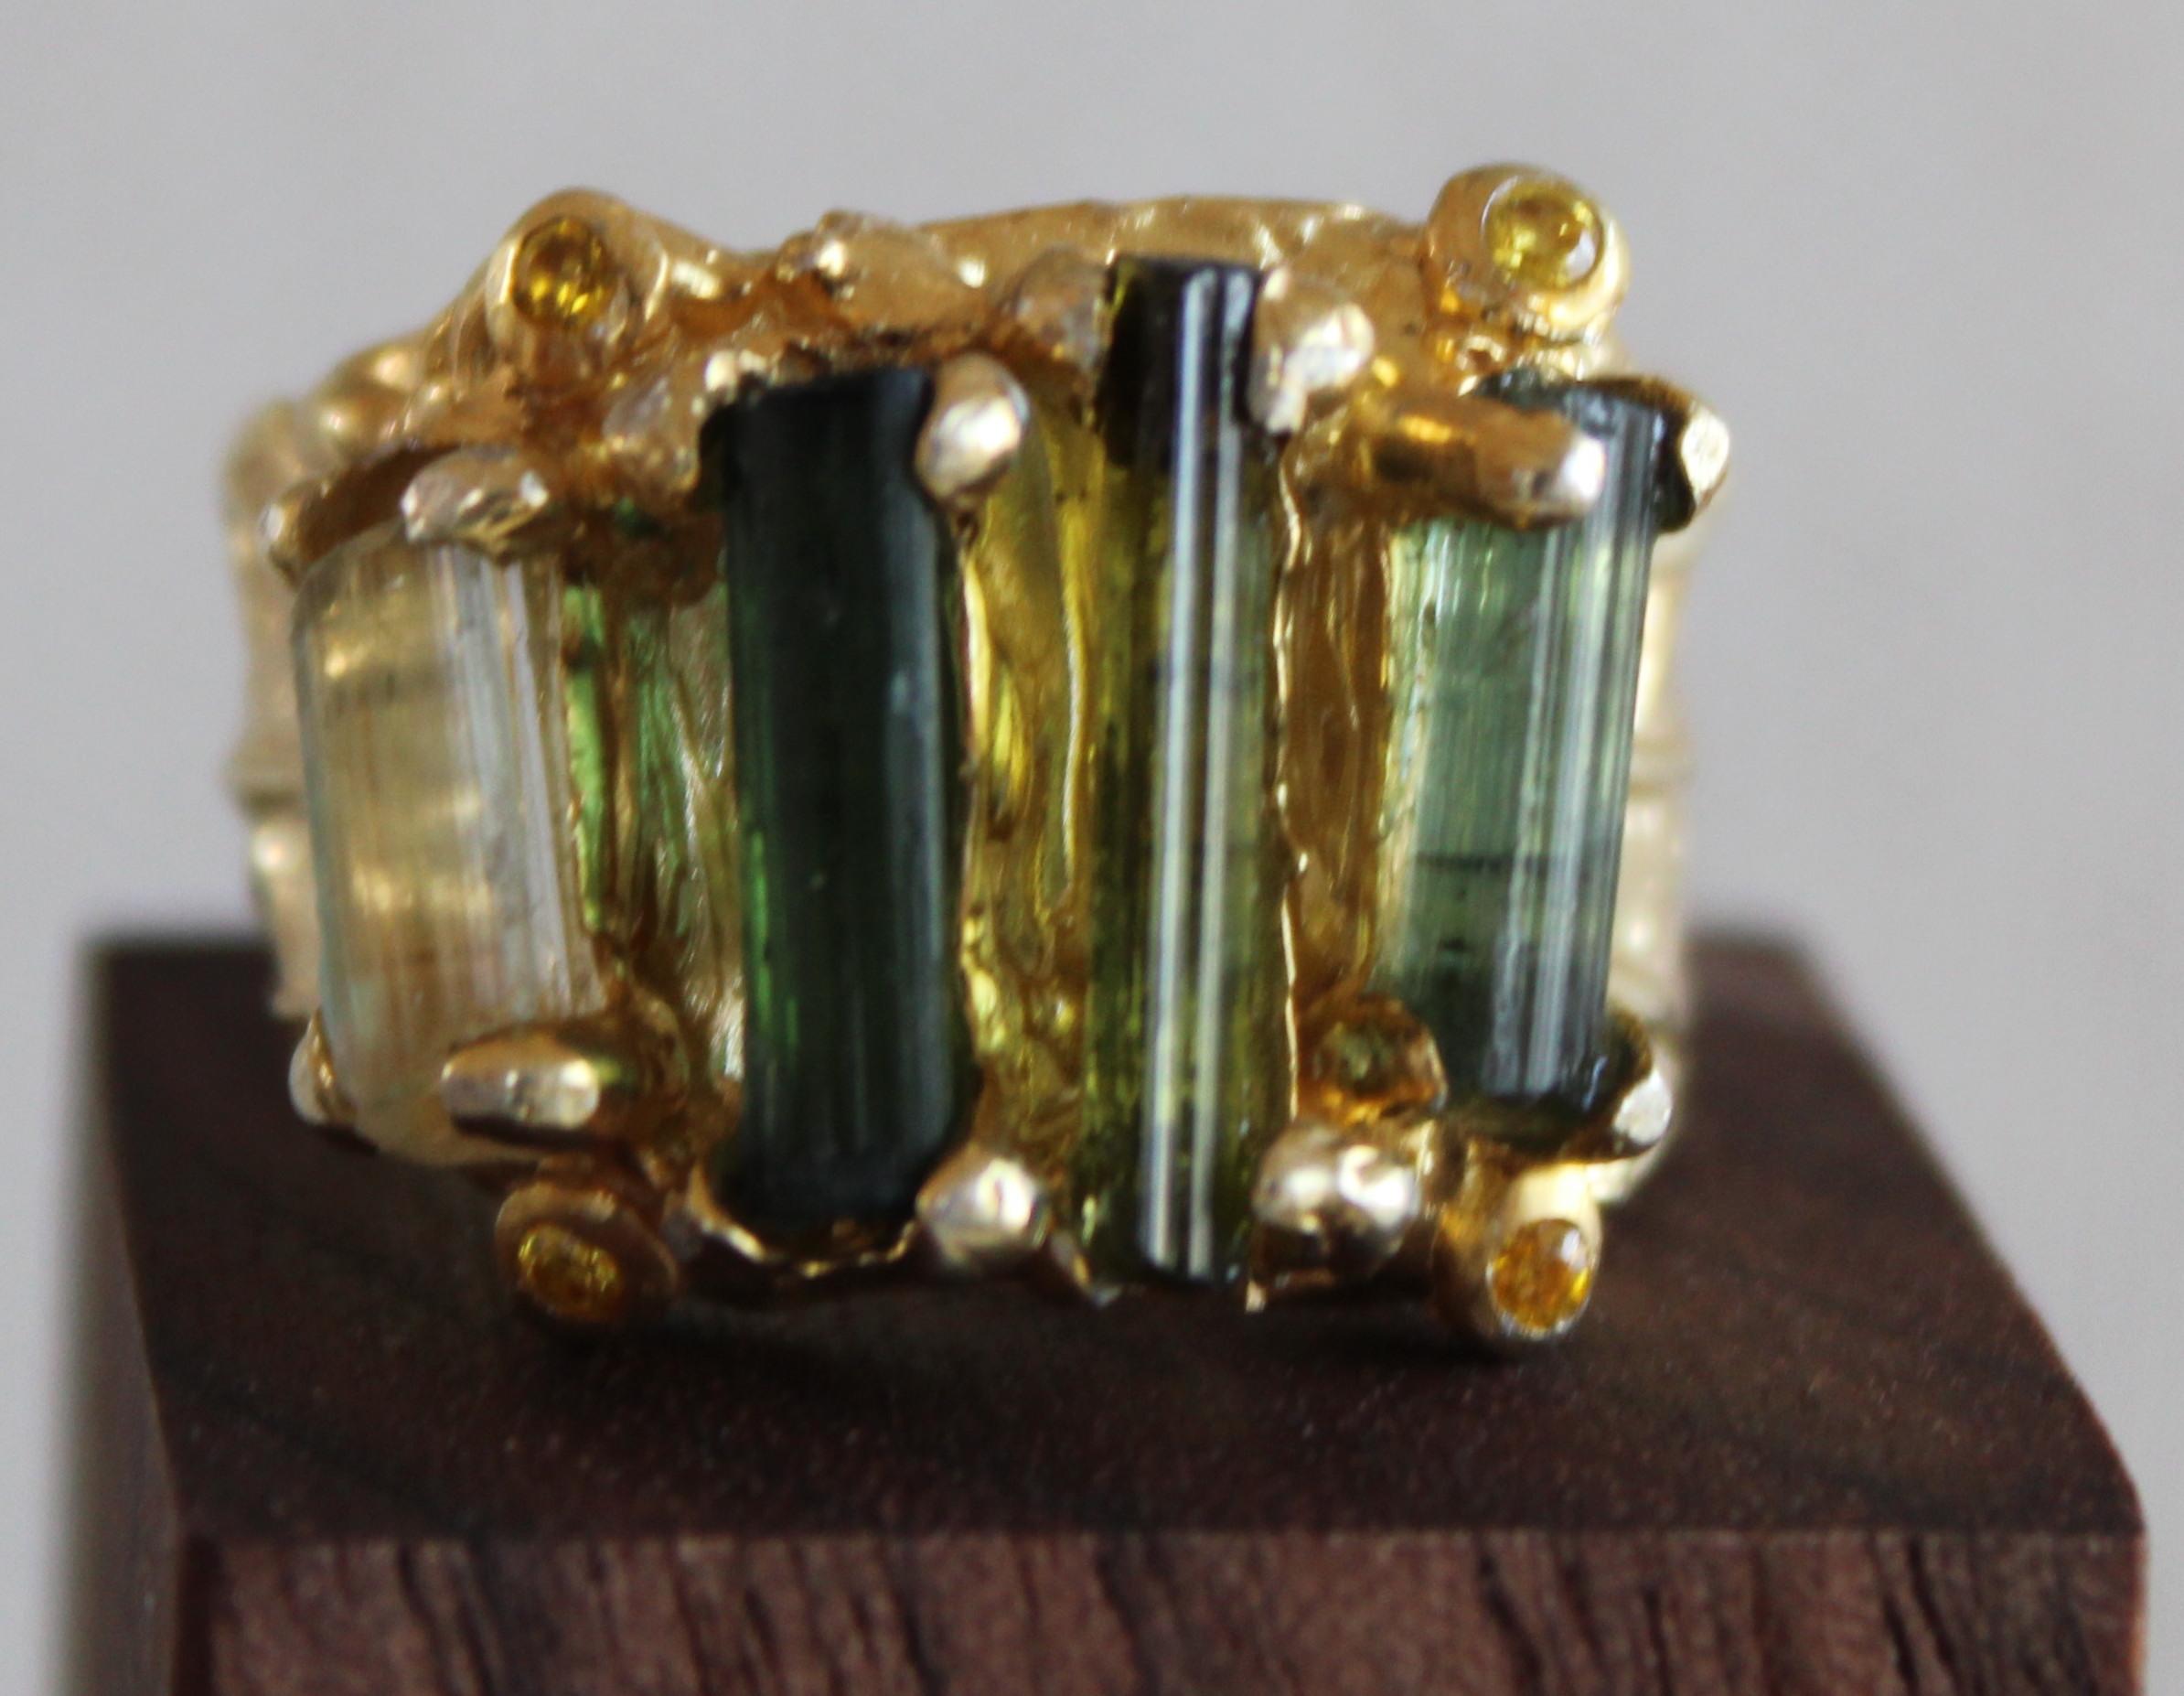 Beautiful Tourmaline cocktail ring. This ring is size 7.5 meant to be worn as a cocktail or fashion ring The ring is cast in sterling silver and plated in 14K gold vermeil. Four raw tourmaline stones are set in the ring vertically ranging from light